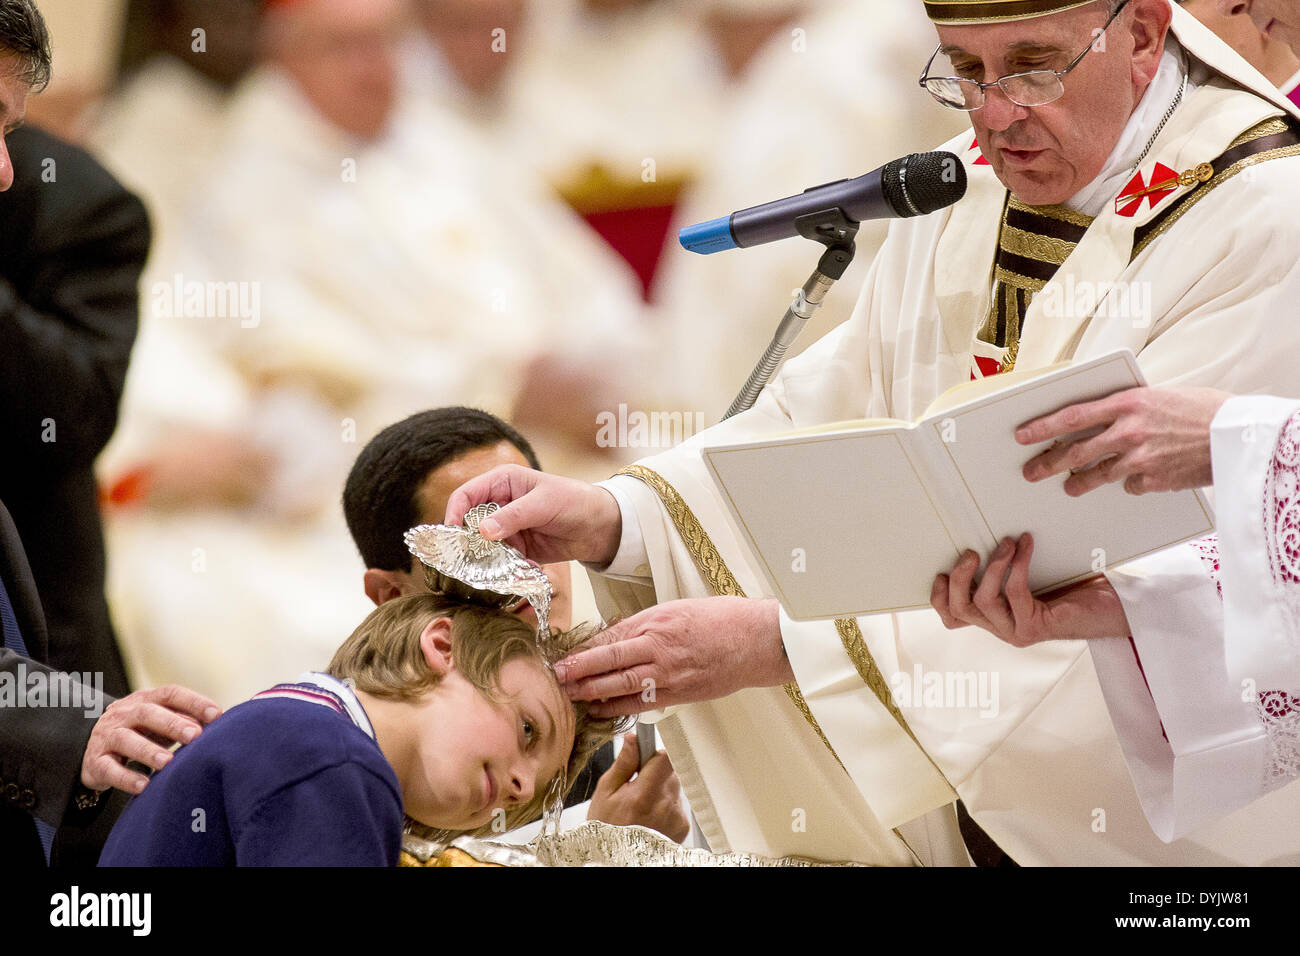 Vatican Vatican City 19th April 2014 Pope Francis Celebration of the Easter Vigil in the Holy Night  Francis Pope baptizes a child Credit:  Realy Easy Star/Alamy Live News Stock Photo